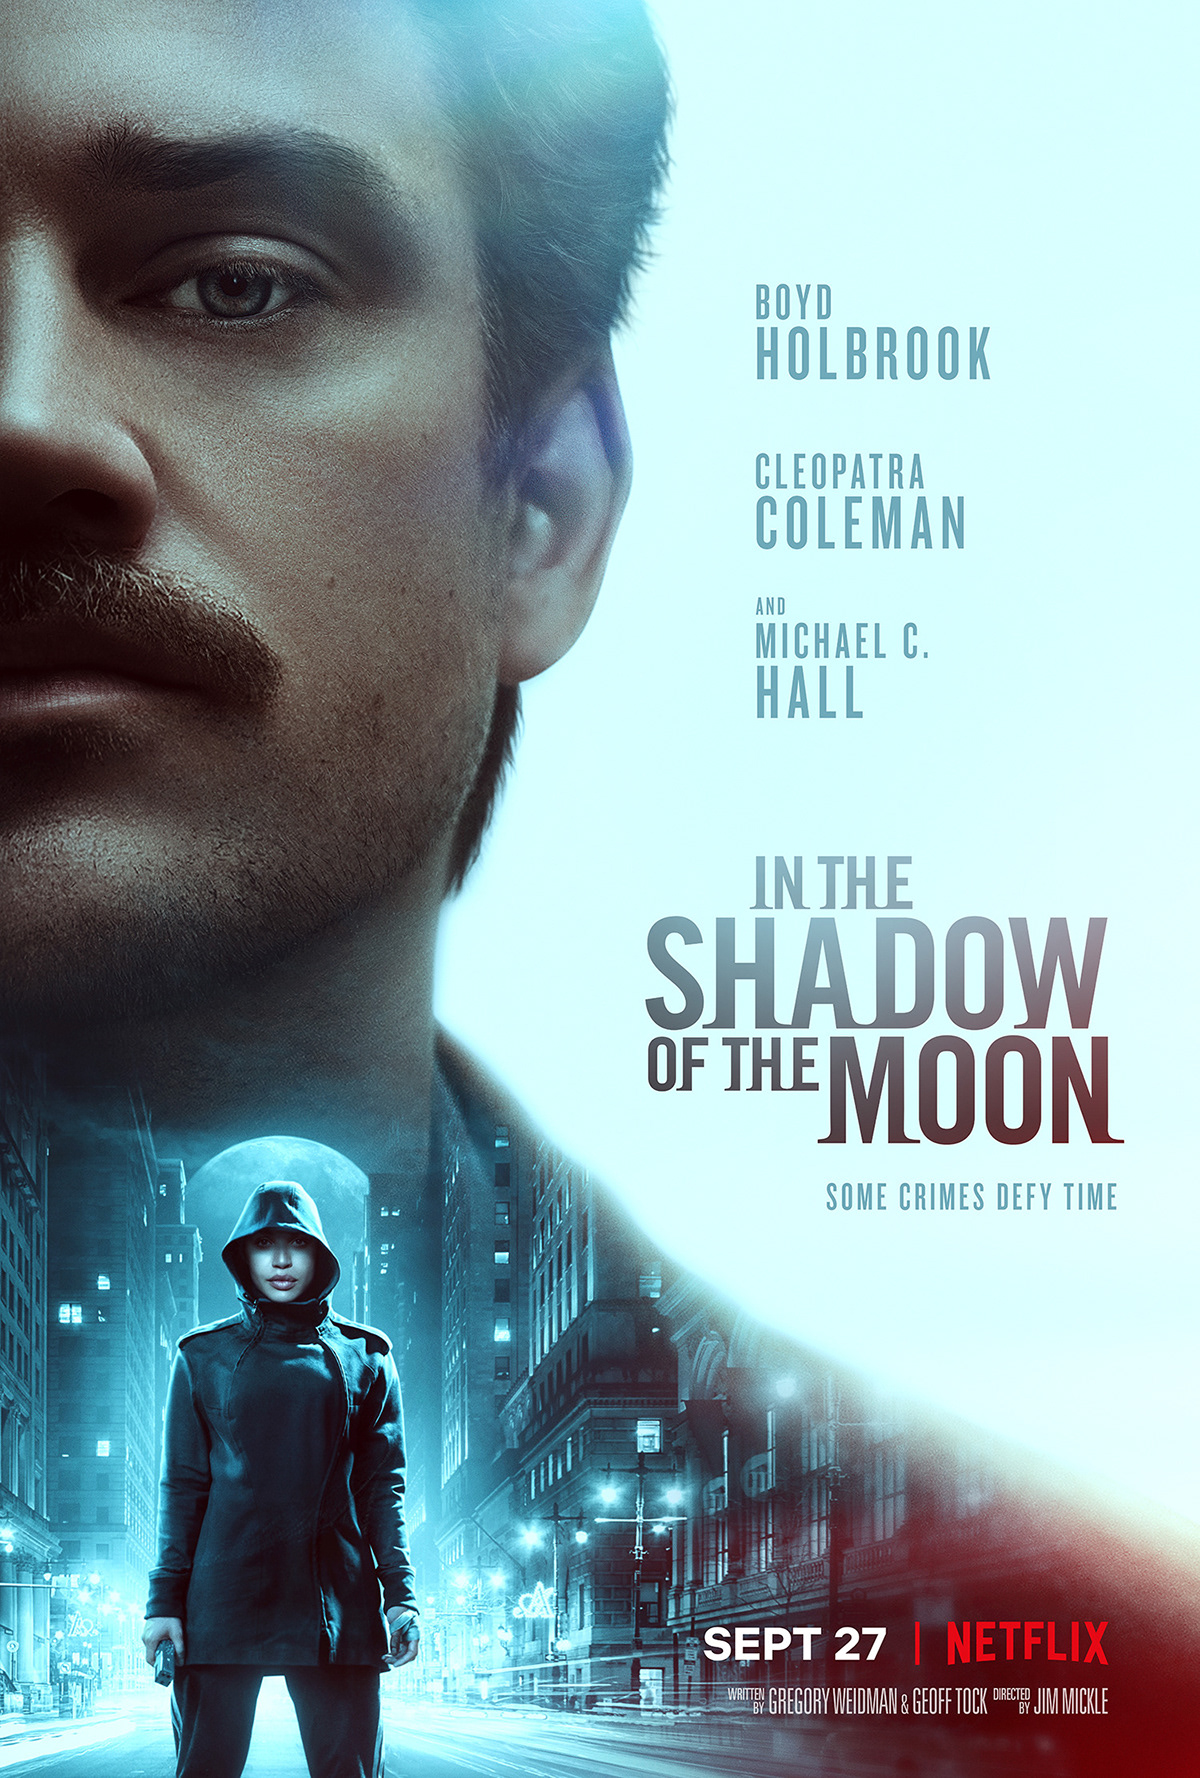 boyd holbrook Cleopatra Coleman film poster In The Shadow Of The Moon key art michael c hall movie poster Netflix one sheet poster